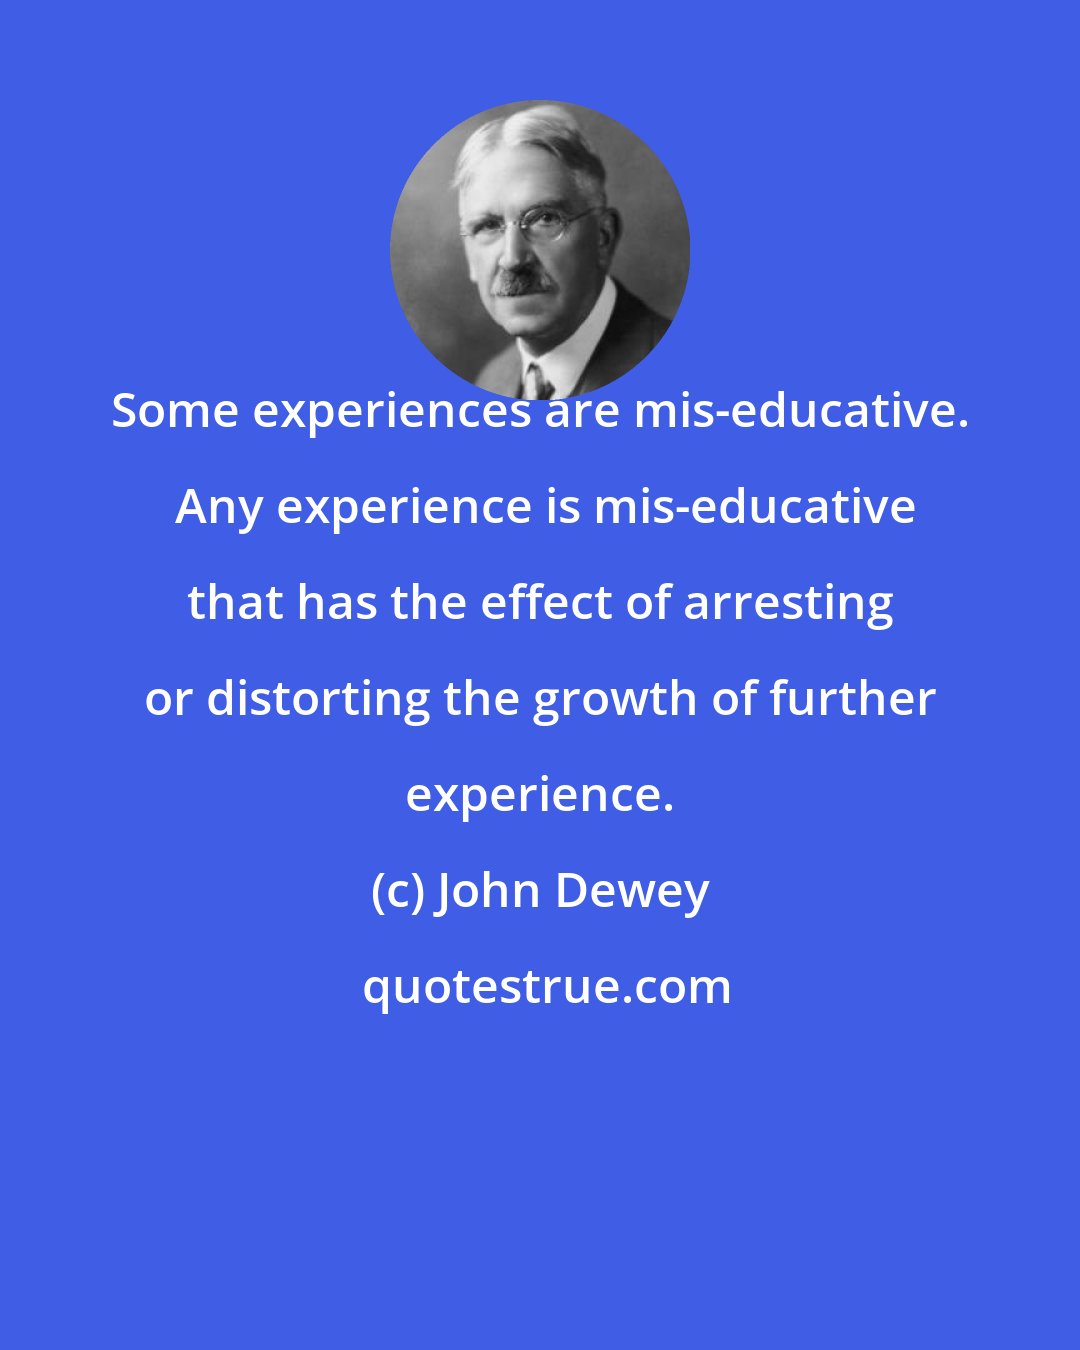 John Dewey: Some experiences are mis-educative.  Any experience is mis-educative that has the effect of arresting or distorting the growth of further experience.